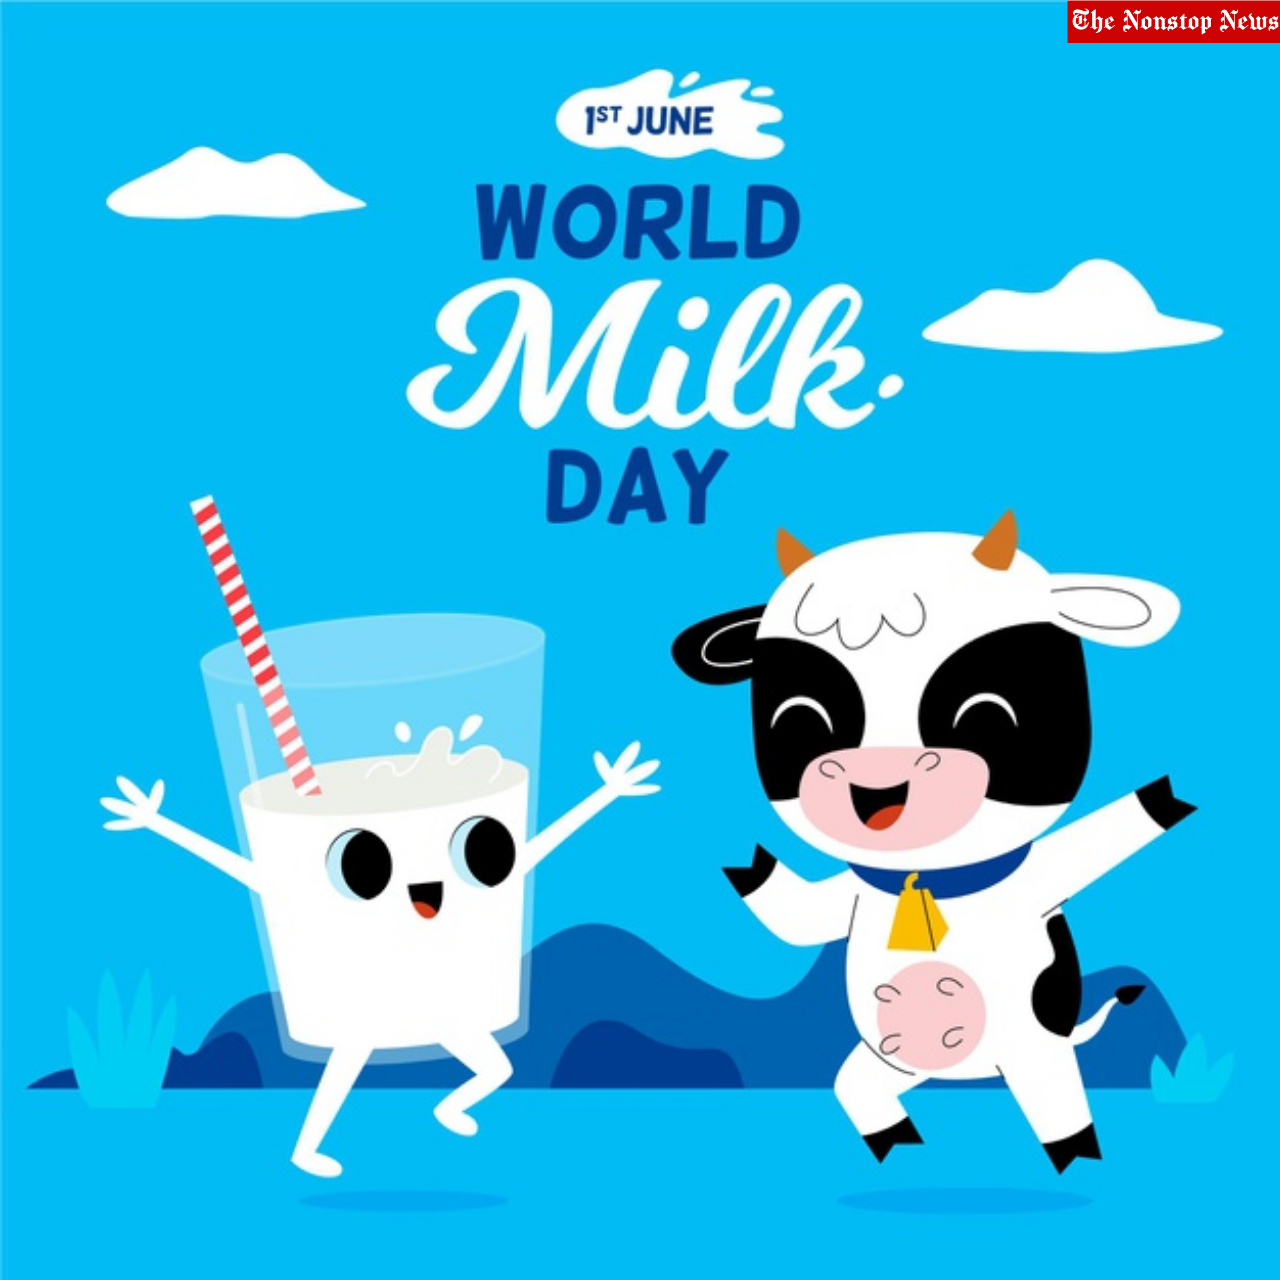 World Milk Day 2021: Theme, Poster, Quotes, Wishes, Messages, Status, Greetings, and Images